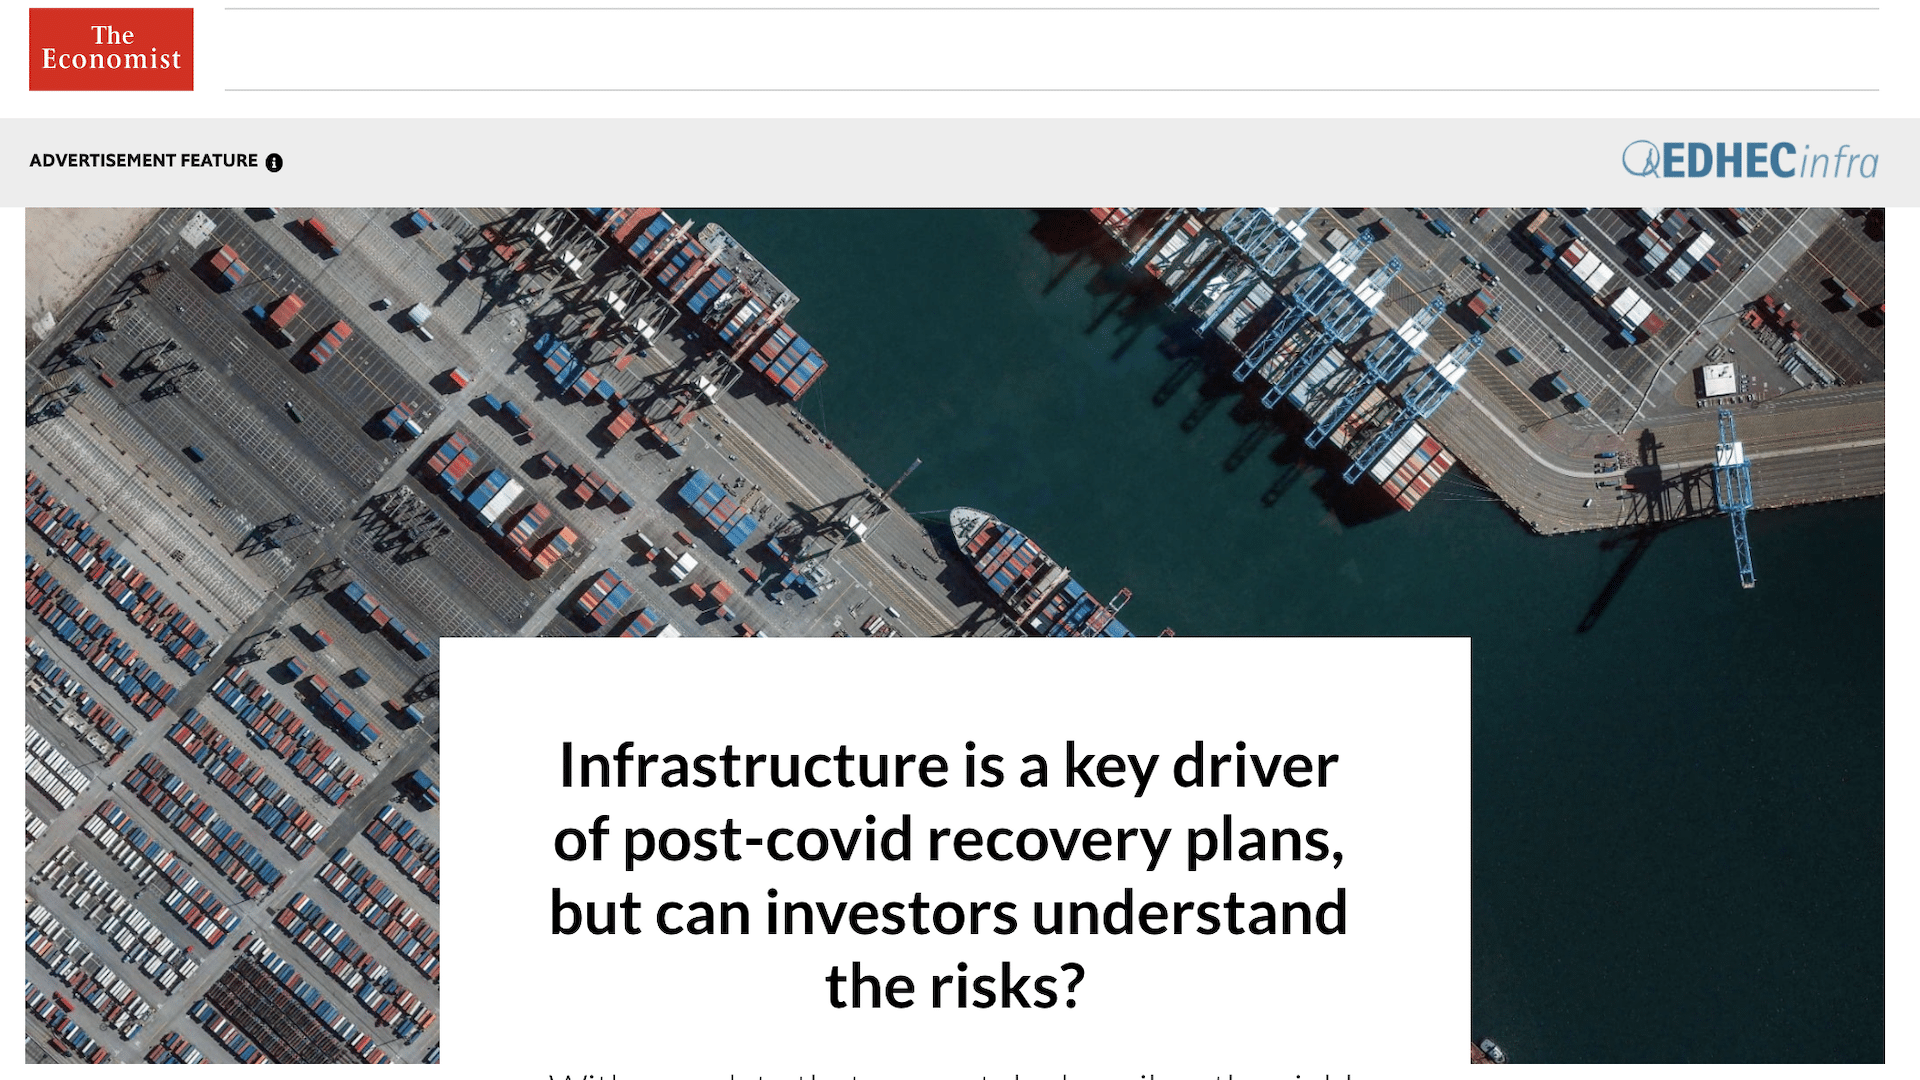 The Economist: Infrastructure is a key driver of post-Covid recovery plans…